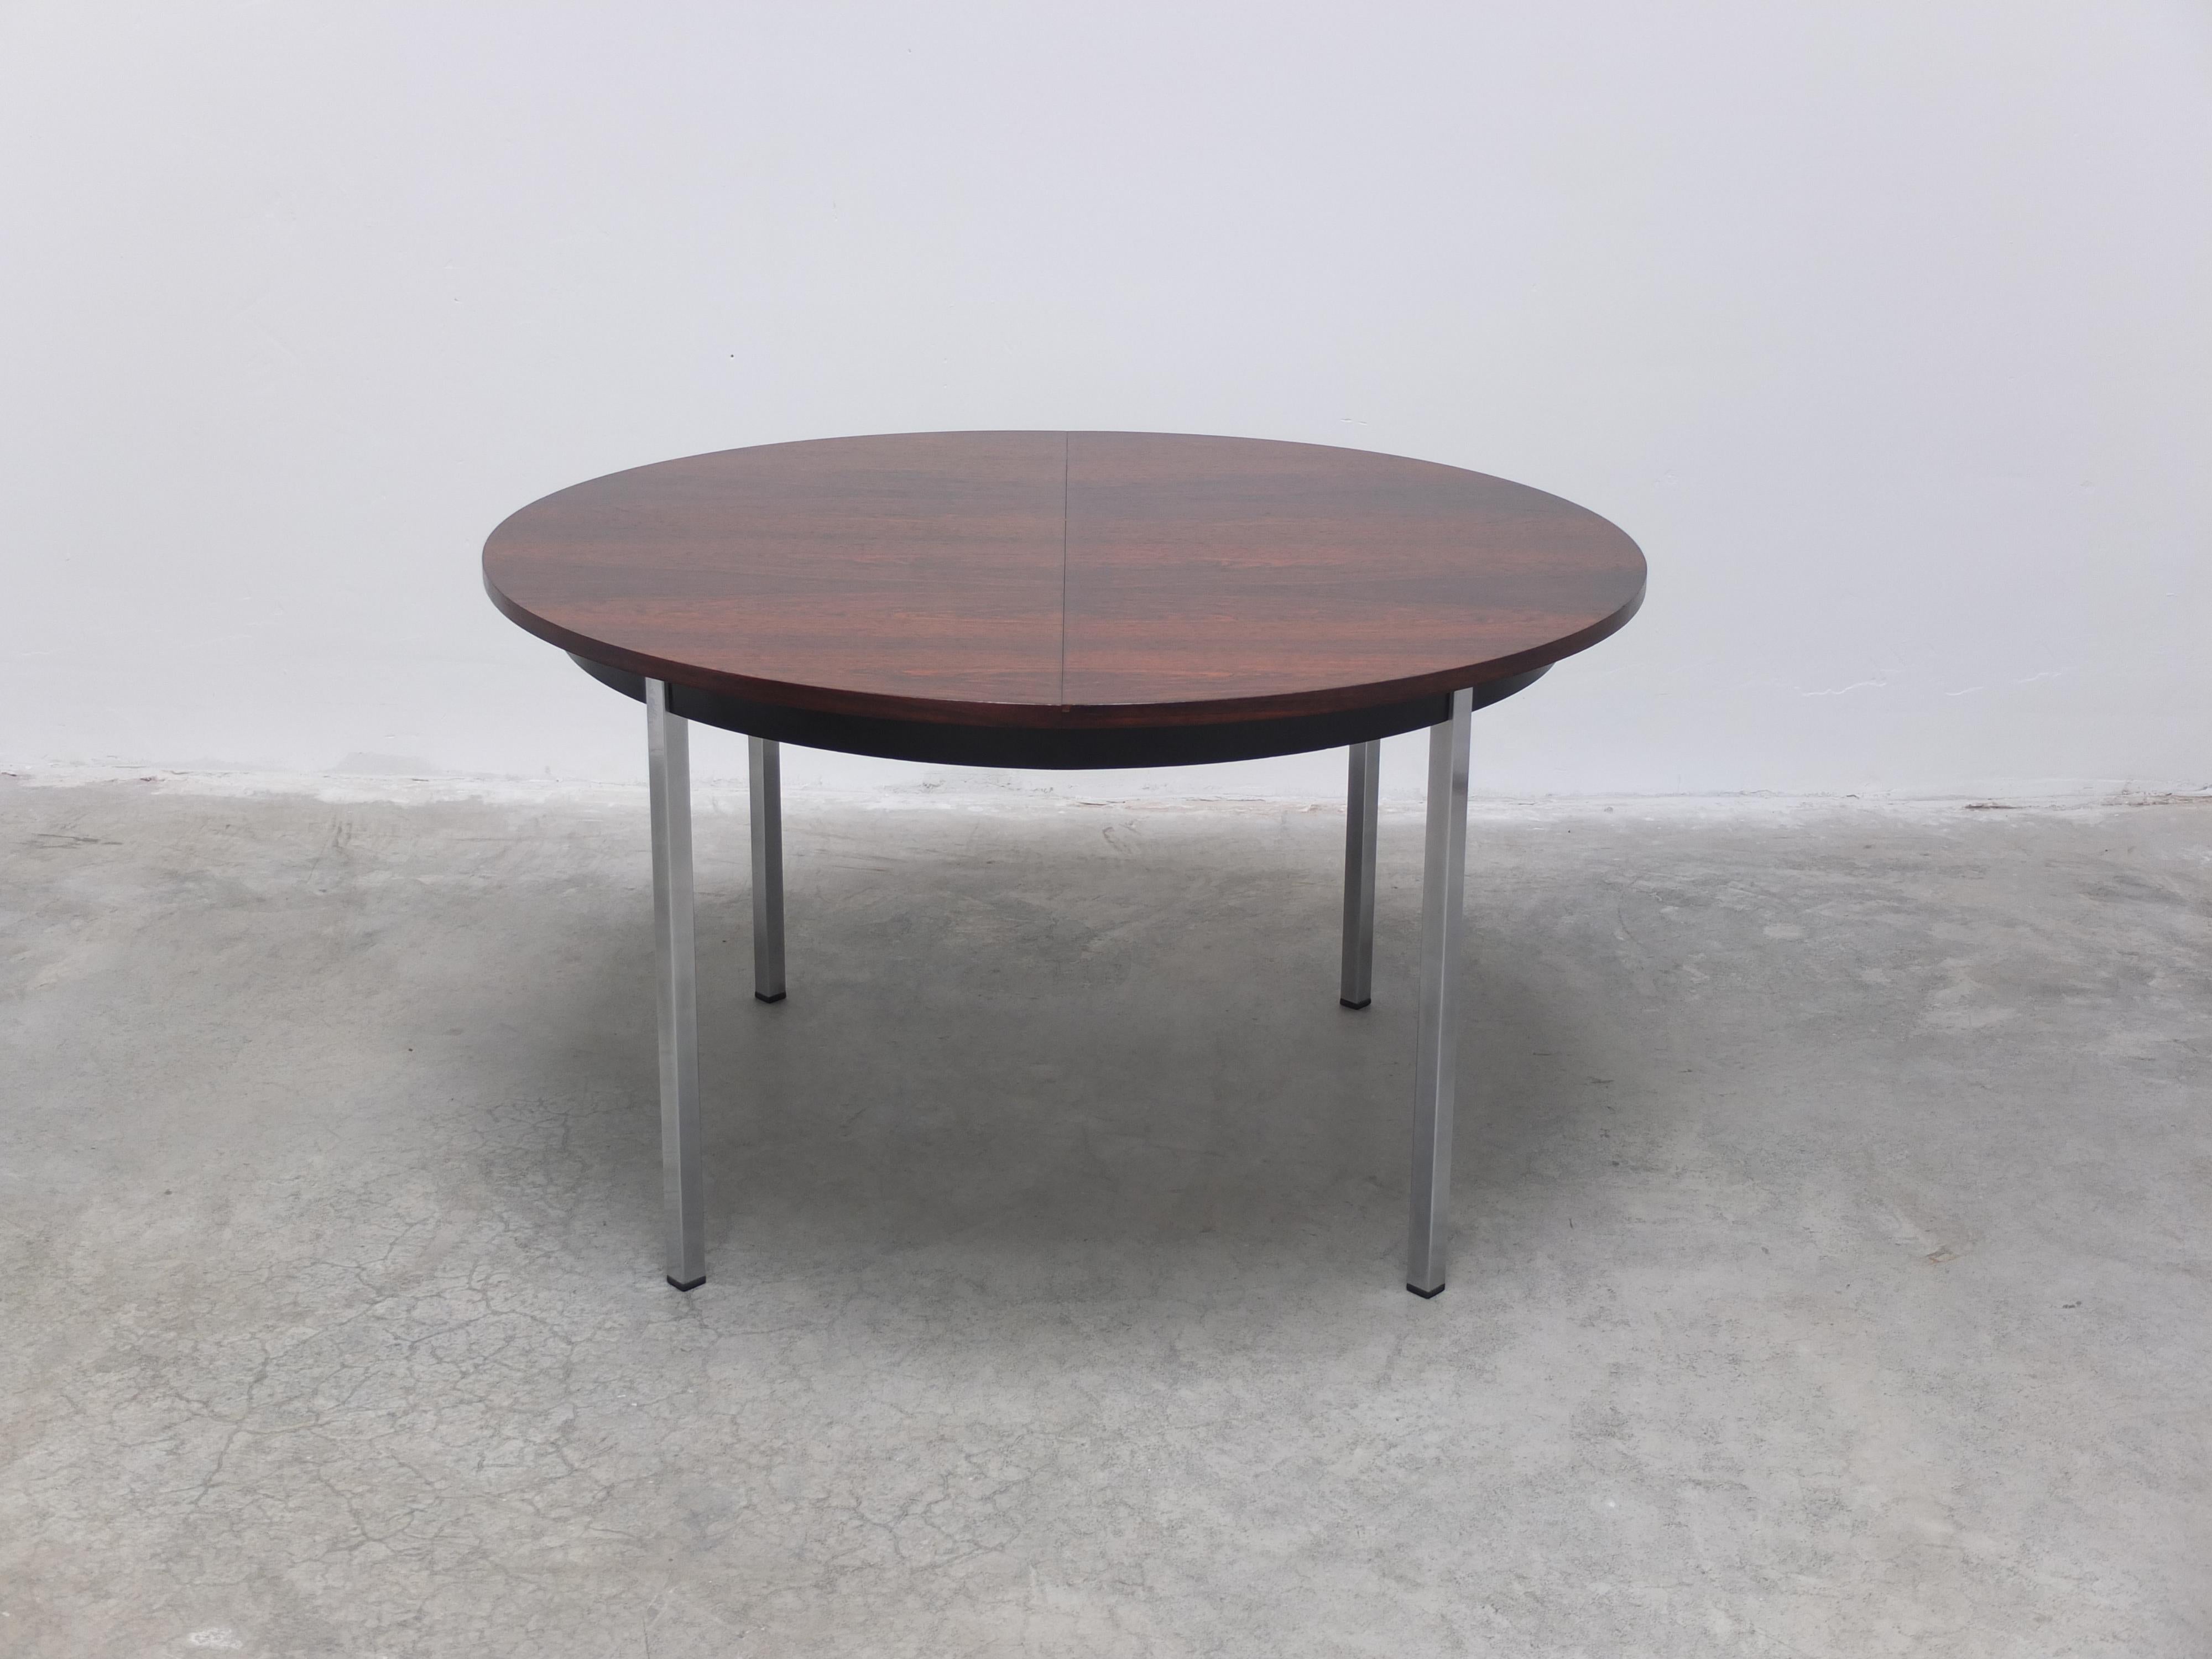 Rare round dining table designed by Alfred Hendrickx and produced by Belform in Belgium during the 1960s. The top has a highly decorative woodgrain. It can be extended to an oval shape (128-188cm) thanks to a central unfolding flip-top. In perfect